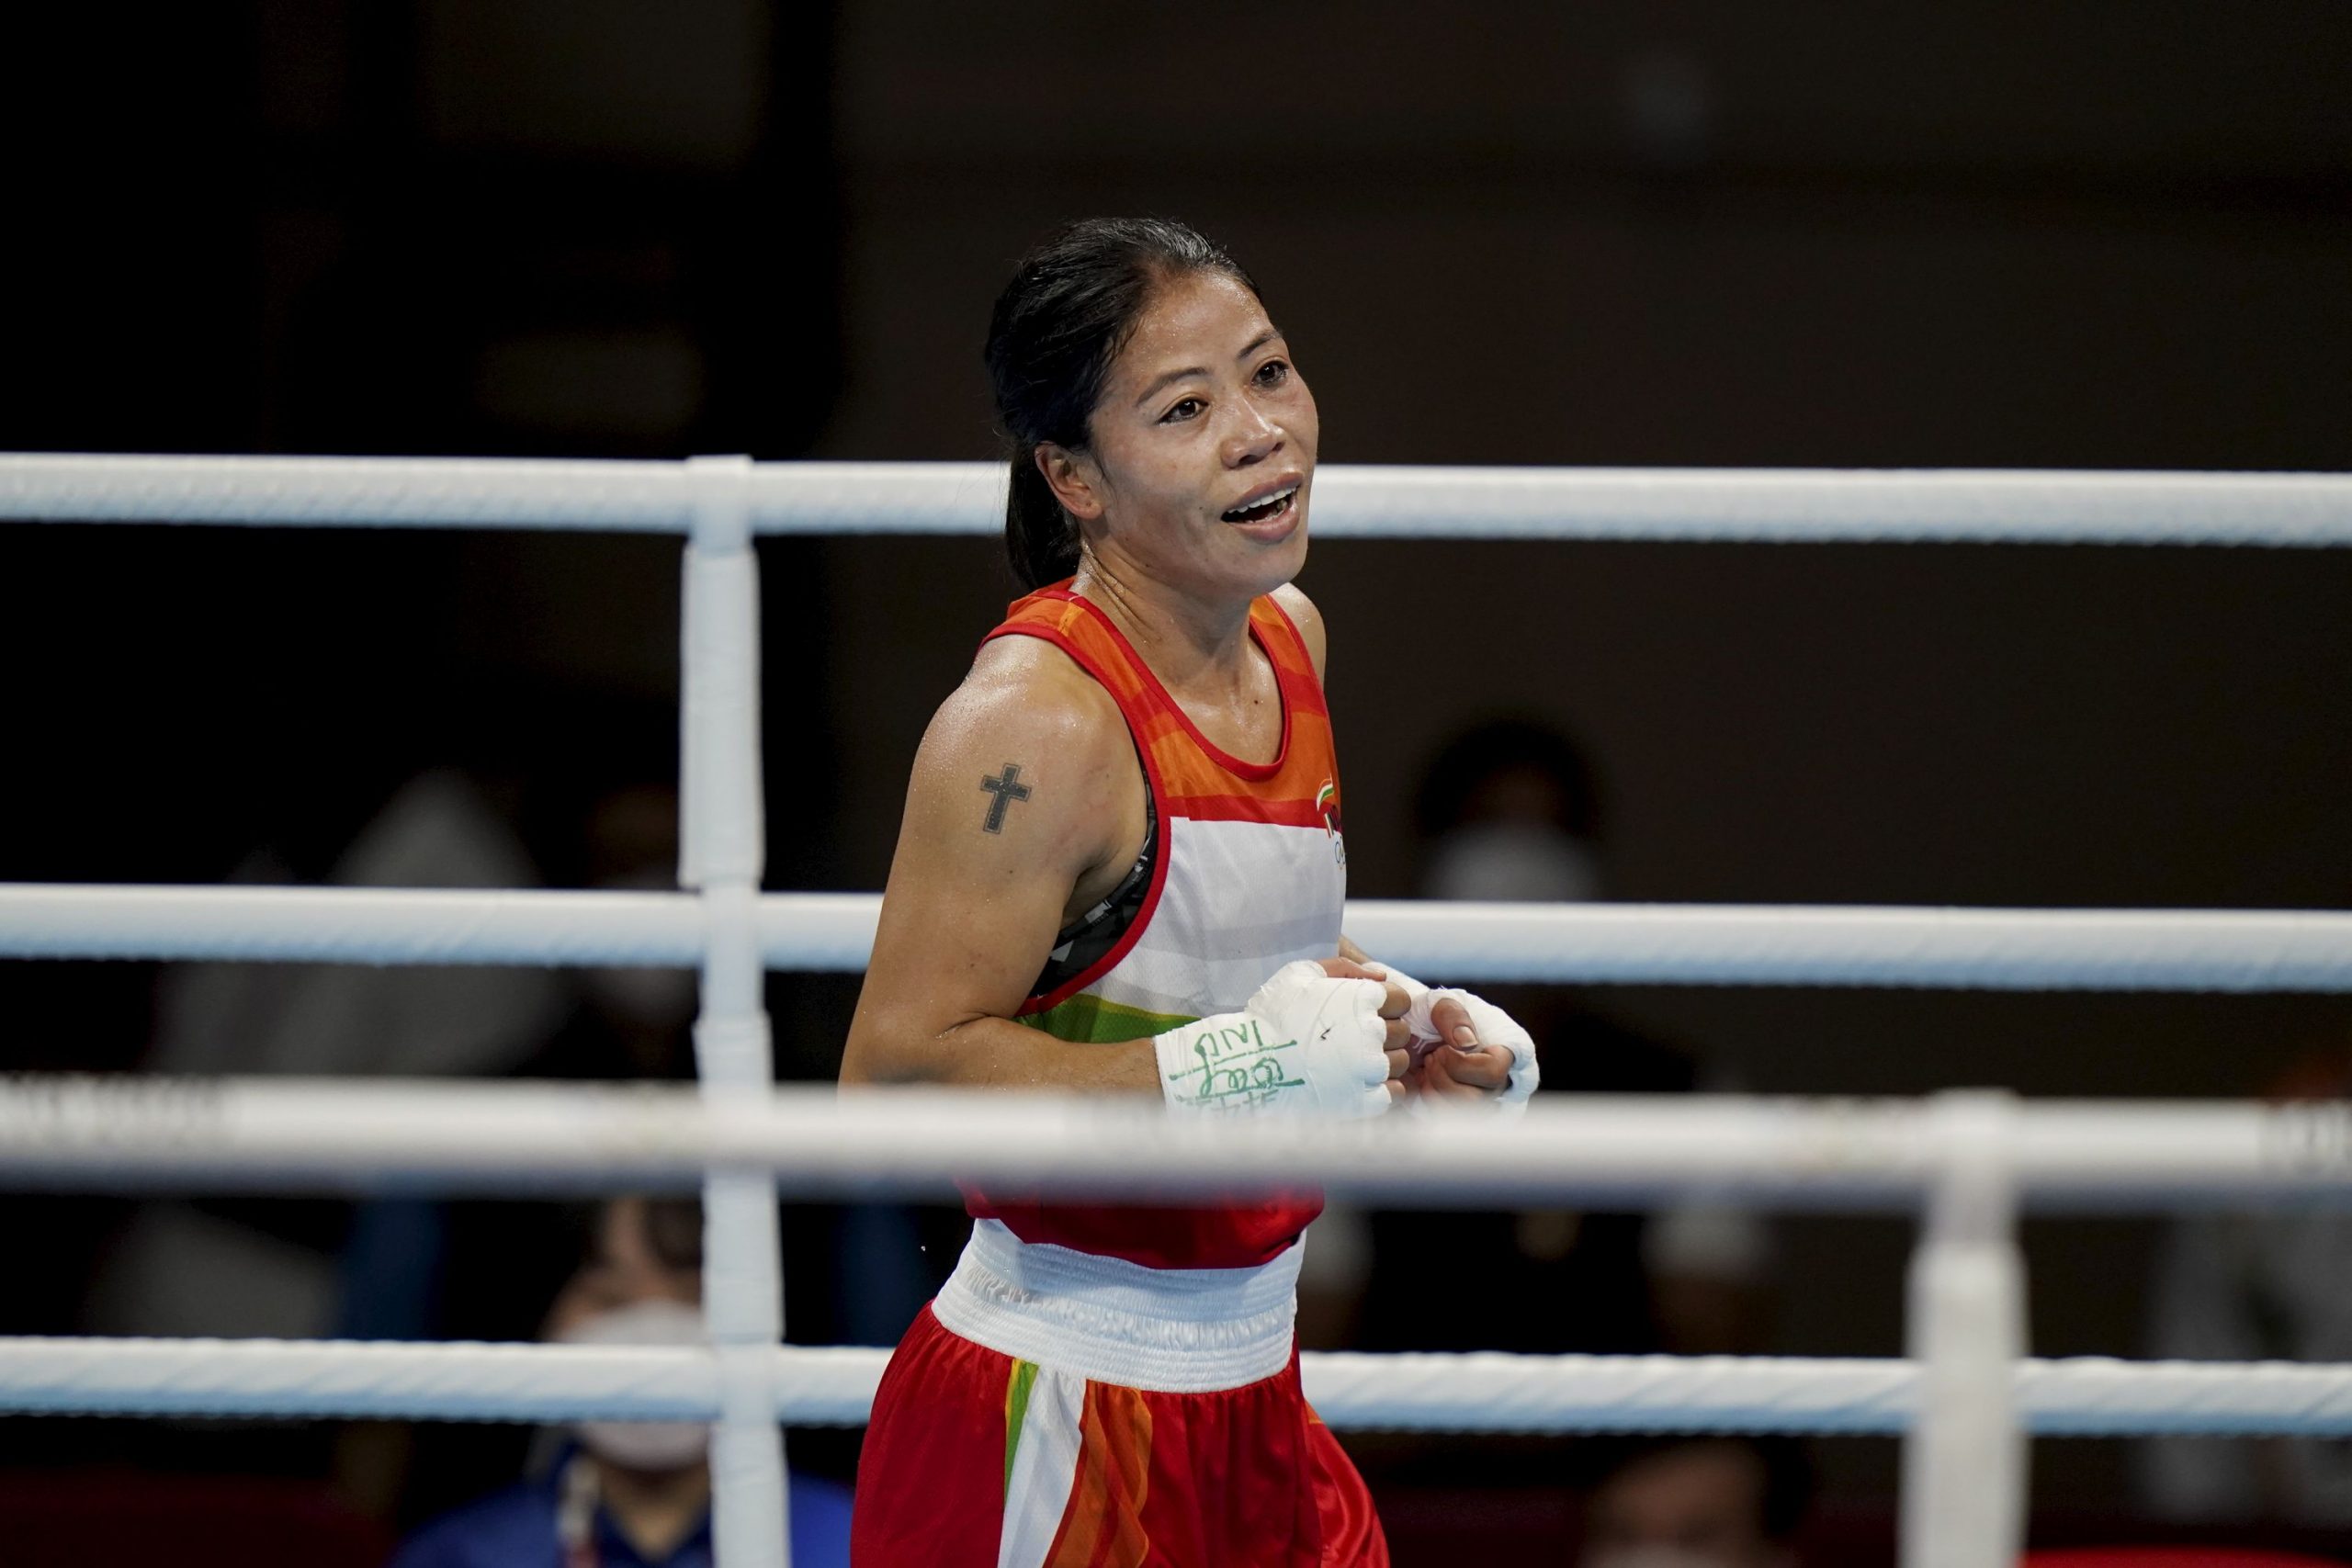 Tokyo Olympics: With history on her side, Mary Kom takes on Ingrit Valencia